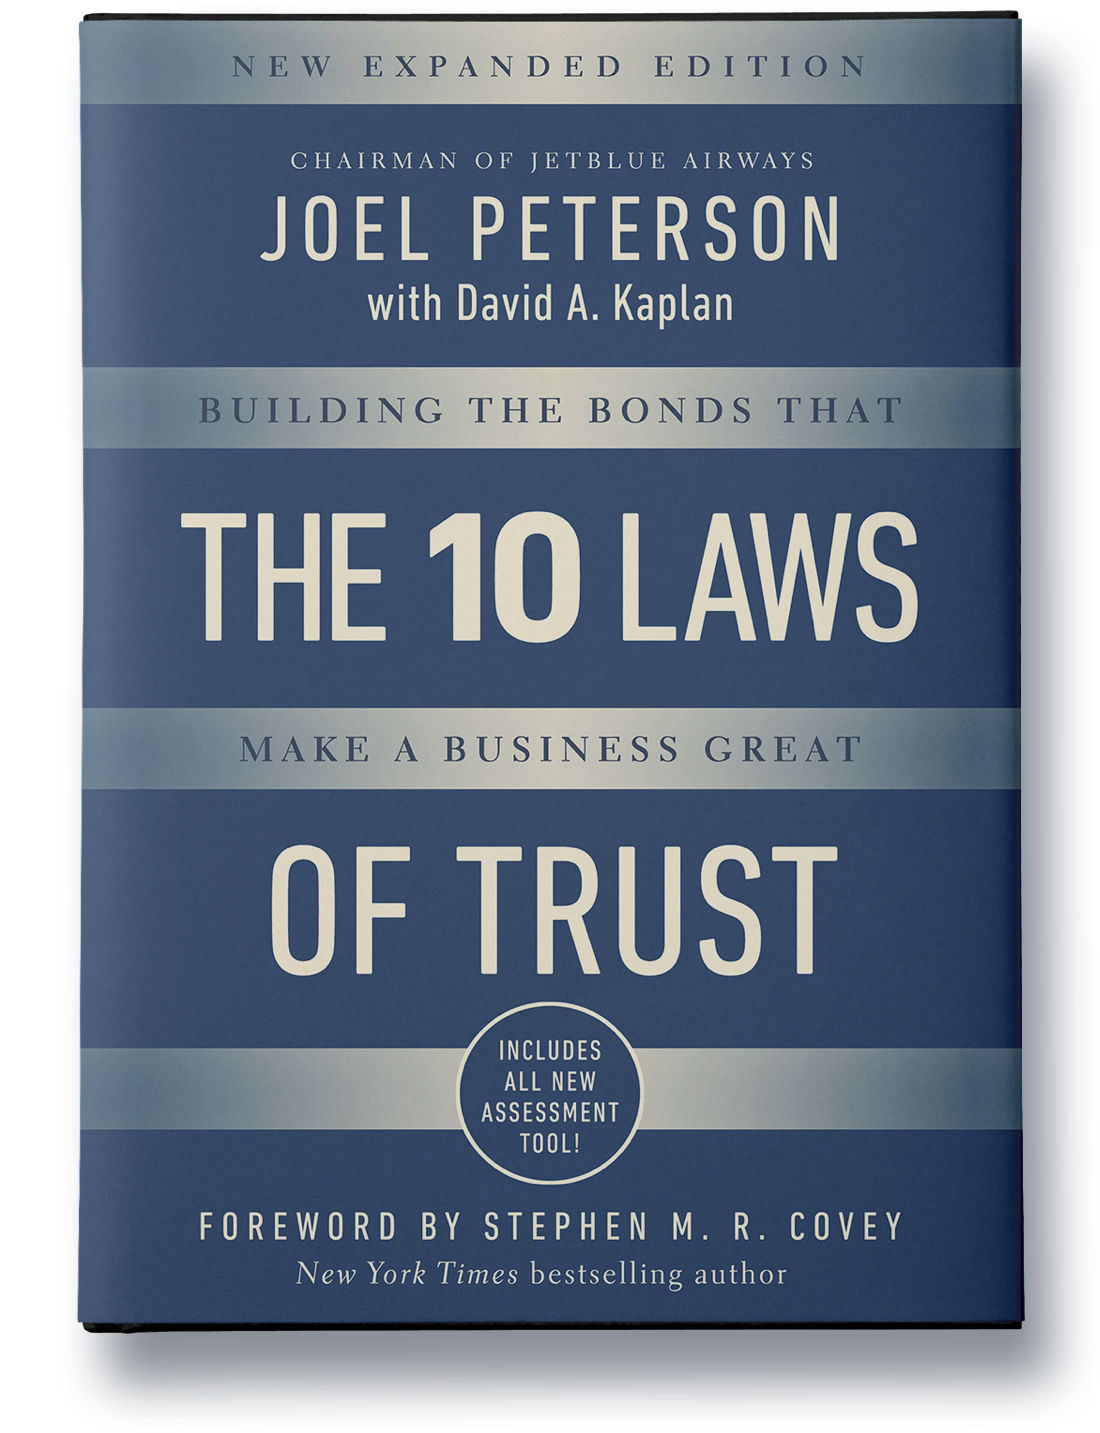 10 Laws of Trust: Building the bonds that make a business great